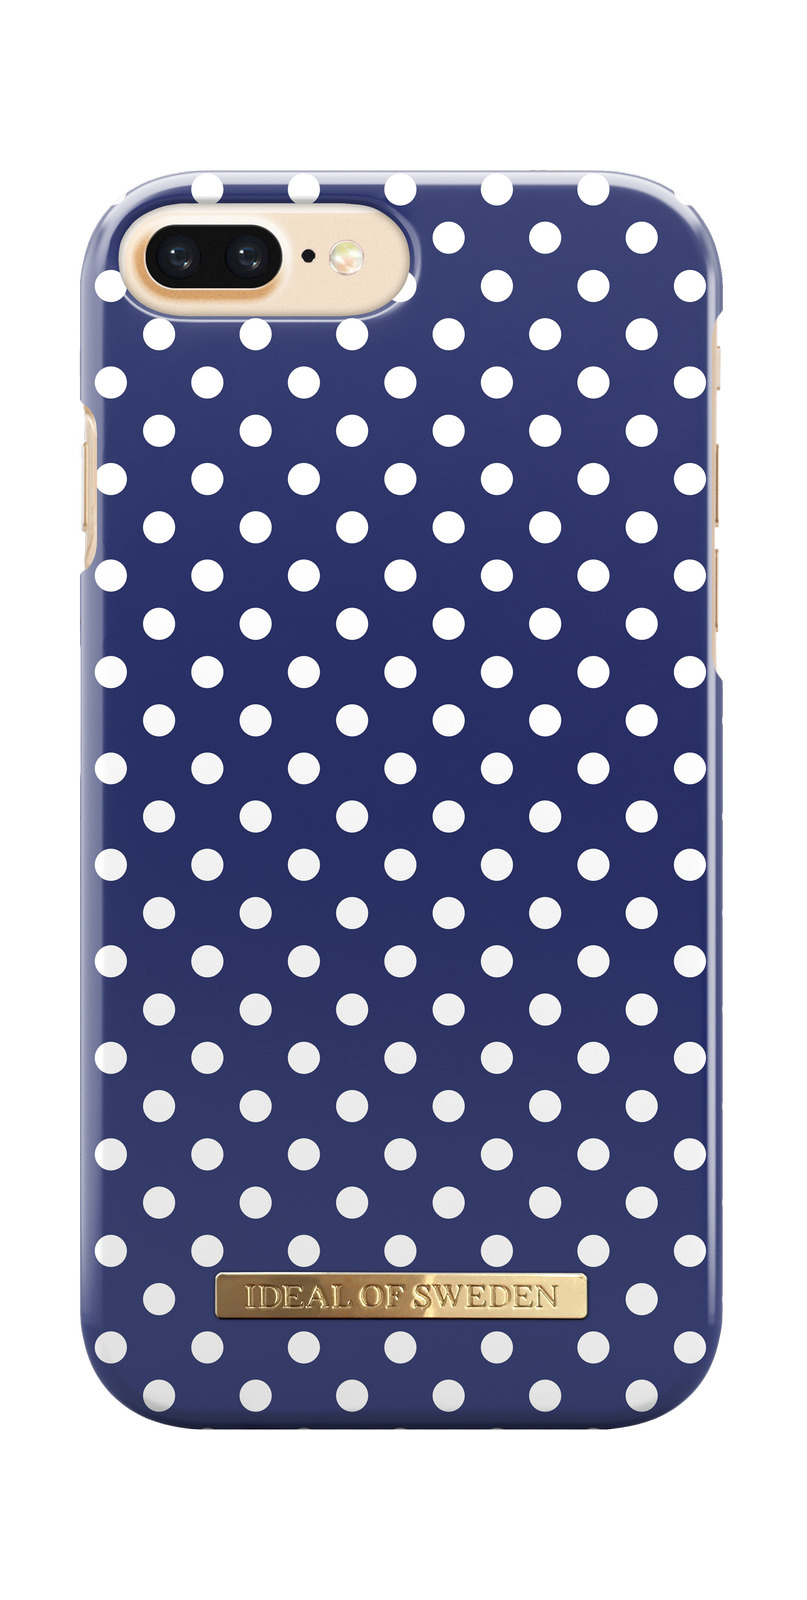 SWEDEN Plus, Apple, Polka Backcover, OF ,iPhone IDEAL 6 iPhone iPhone 7 8 Dots Plus, Fashion, Plus